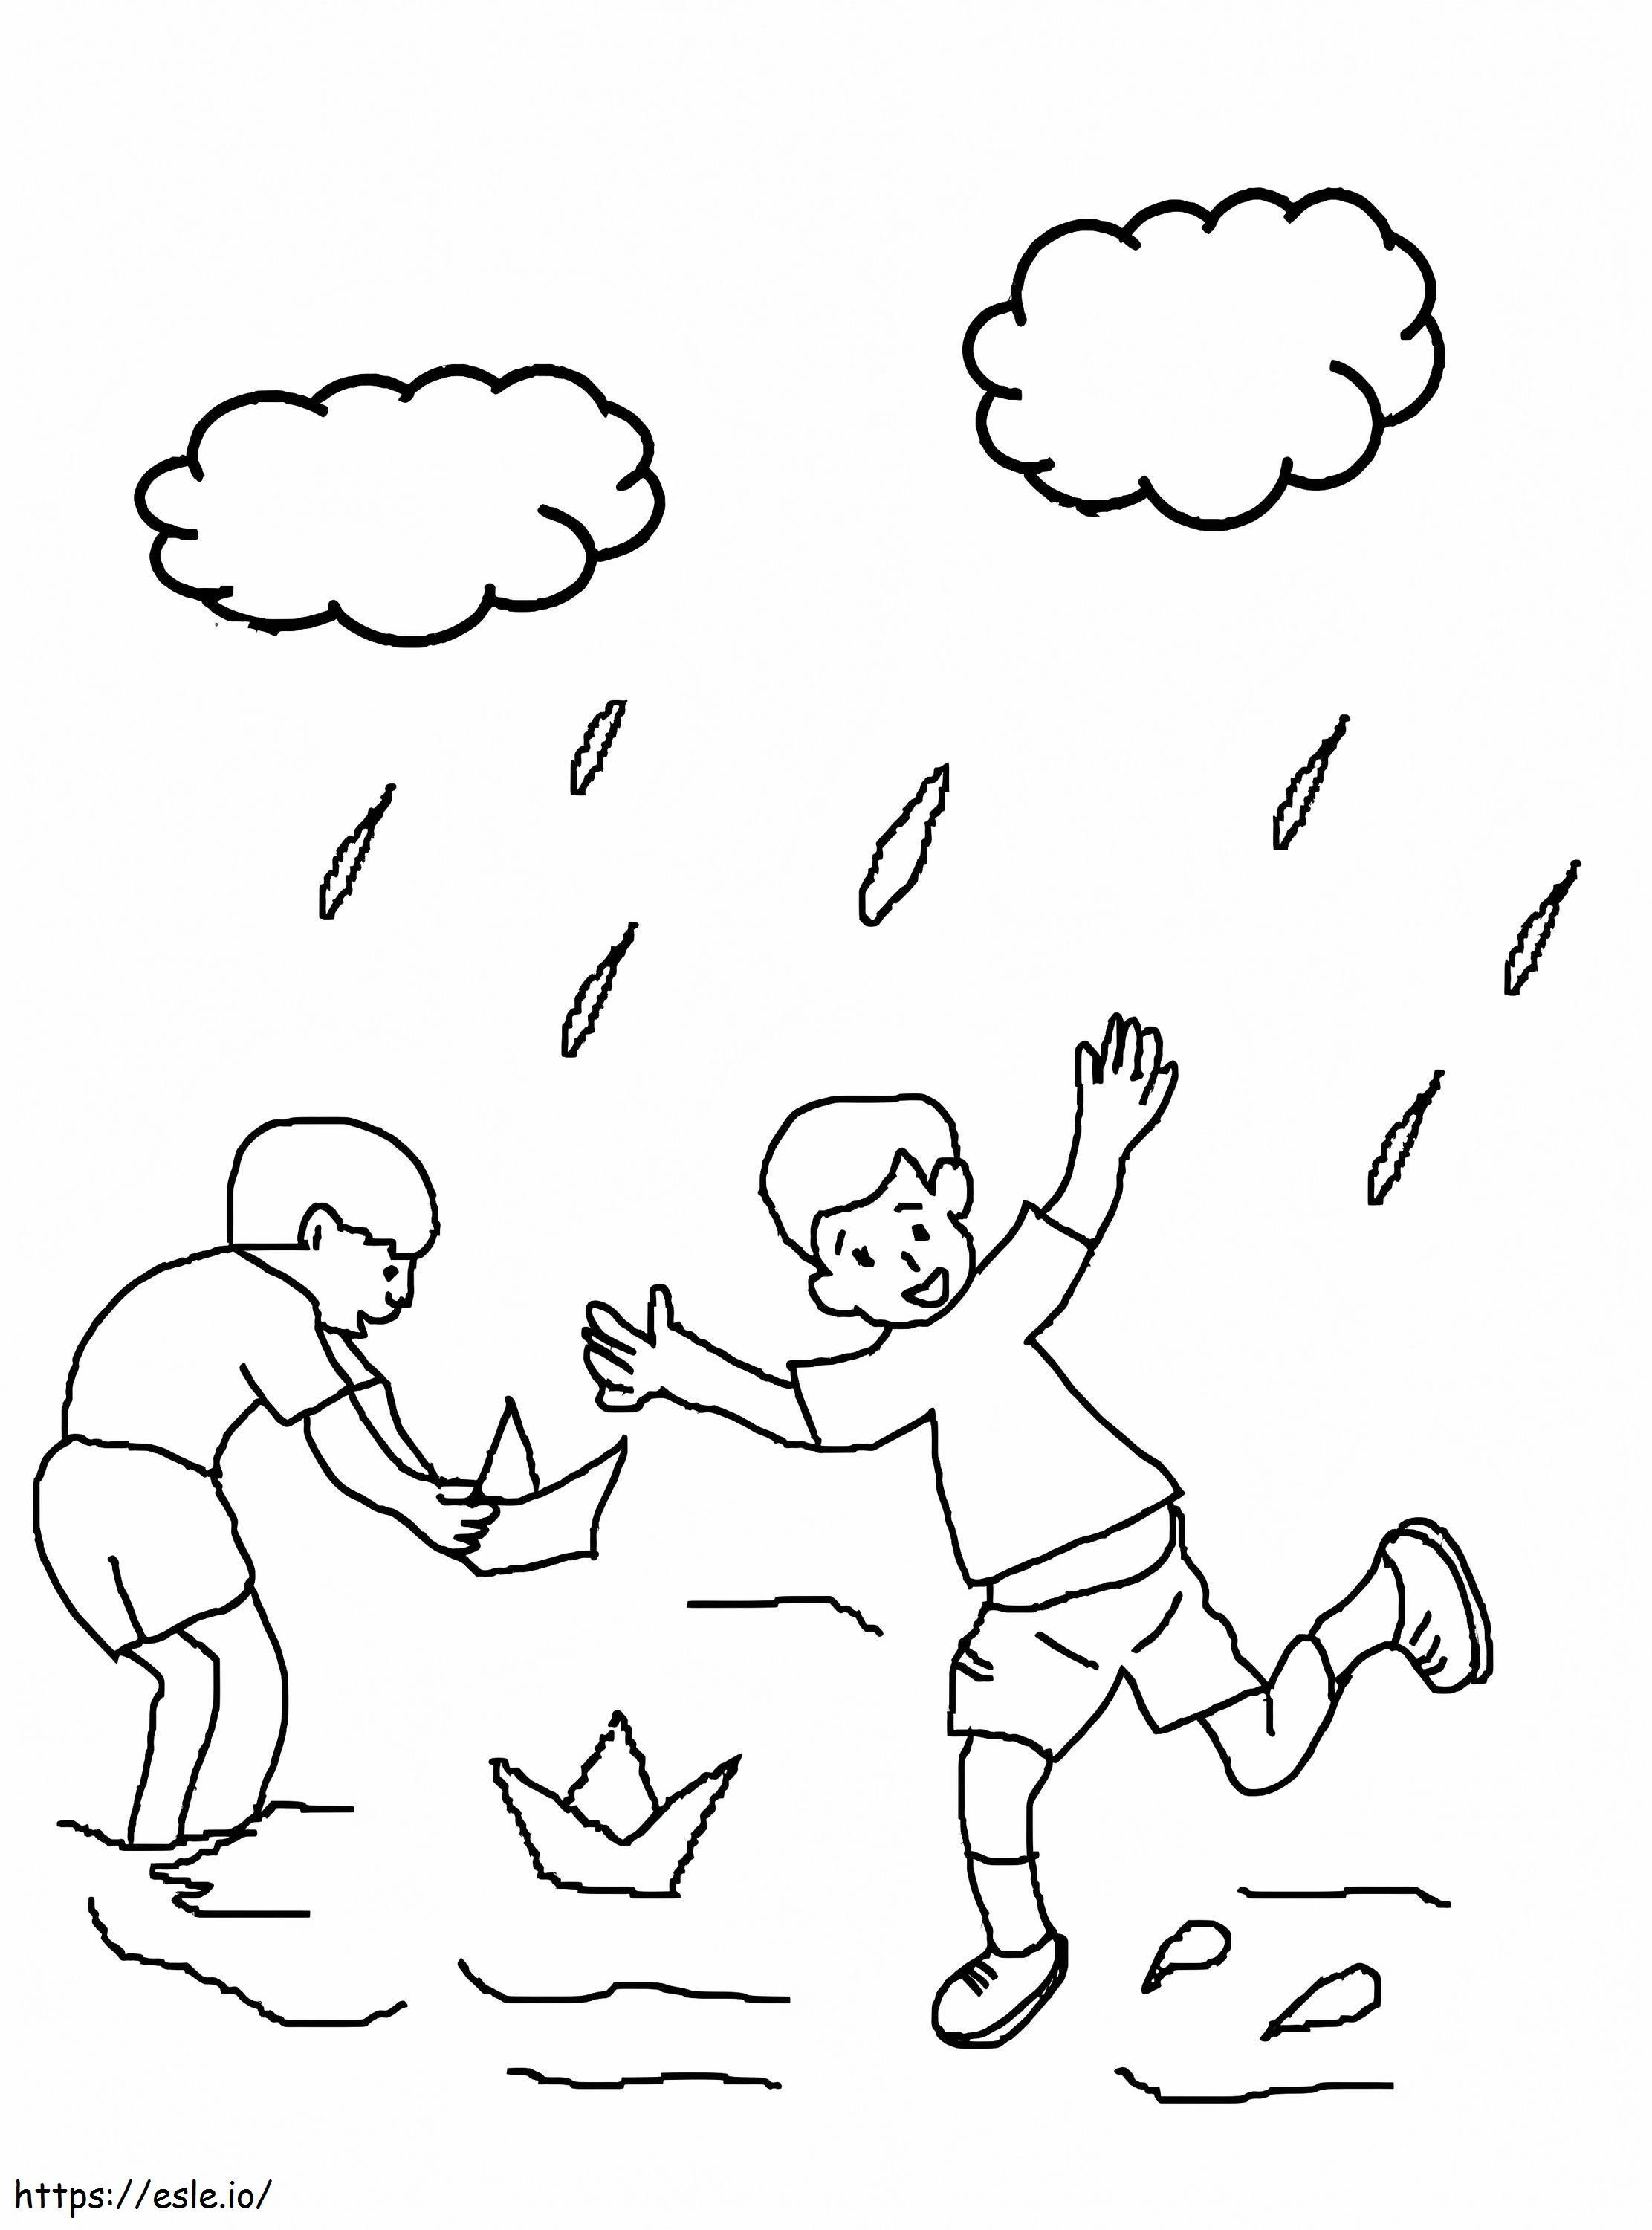 Friendship 6 coloring page